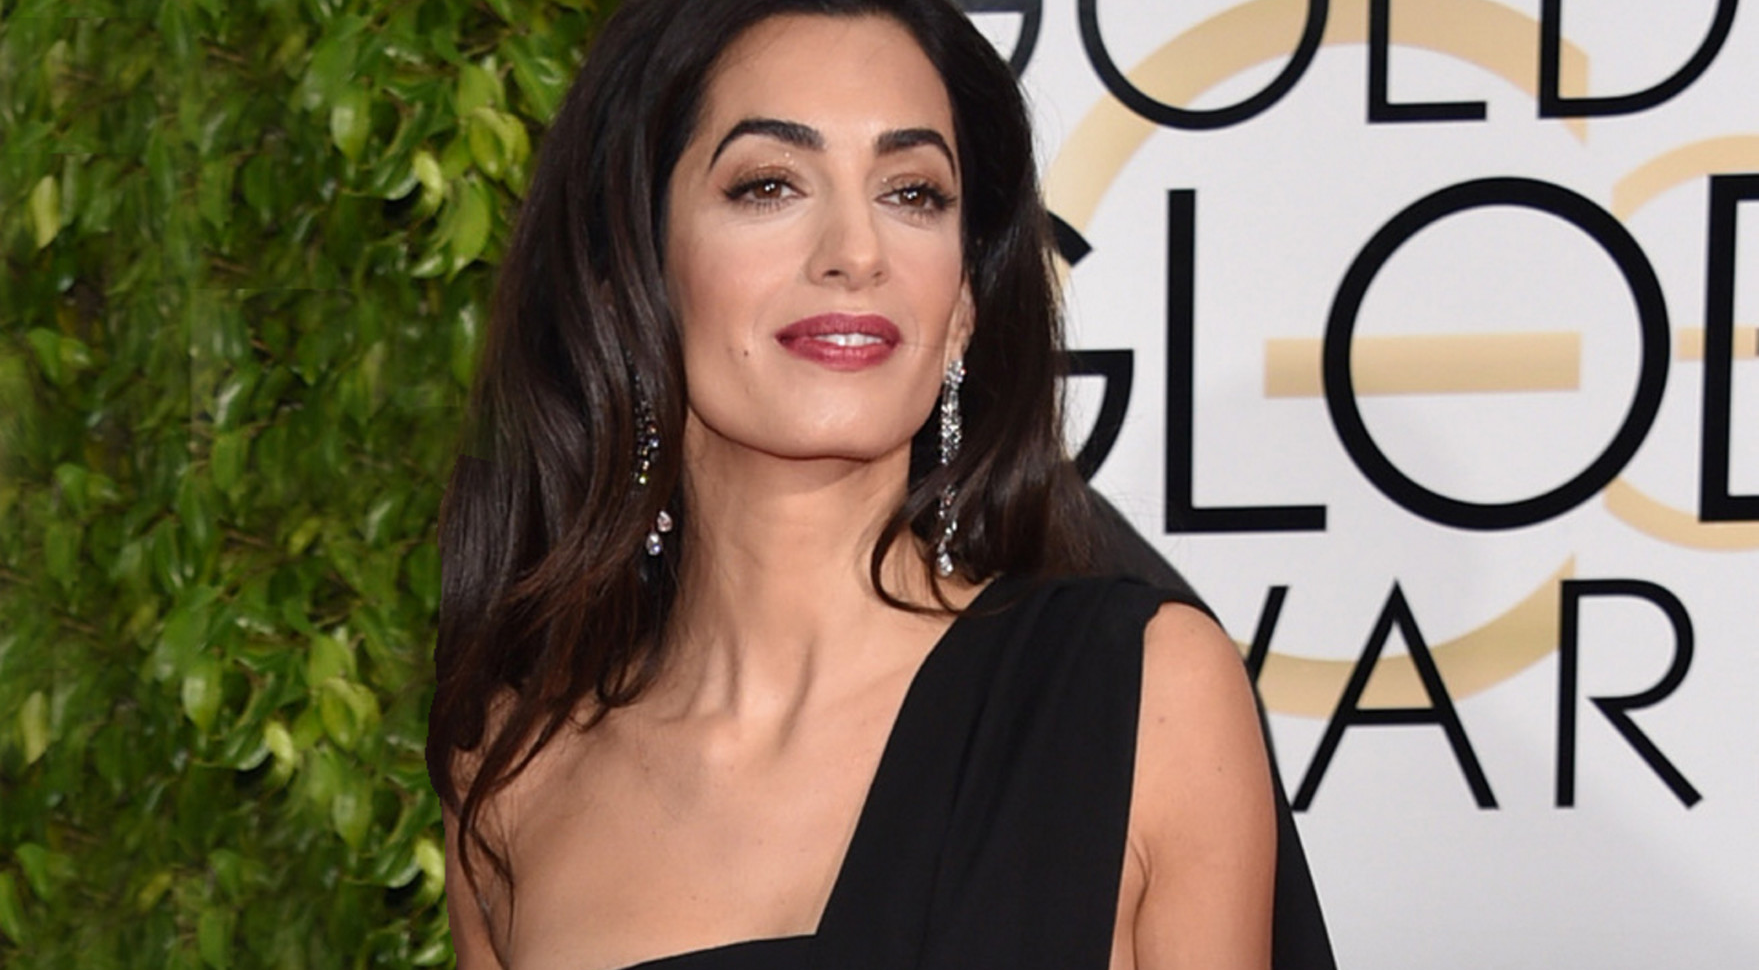 Back to serious business: Amal Clooney returns to London